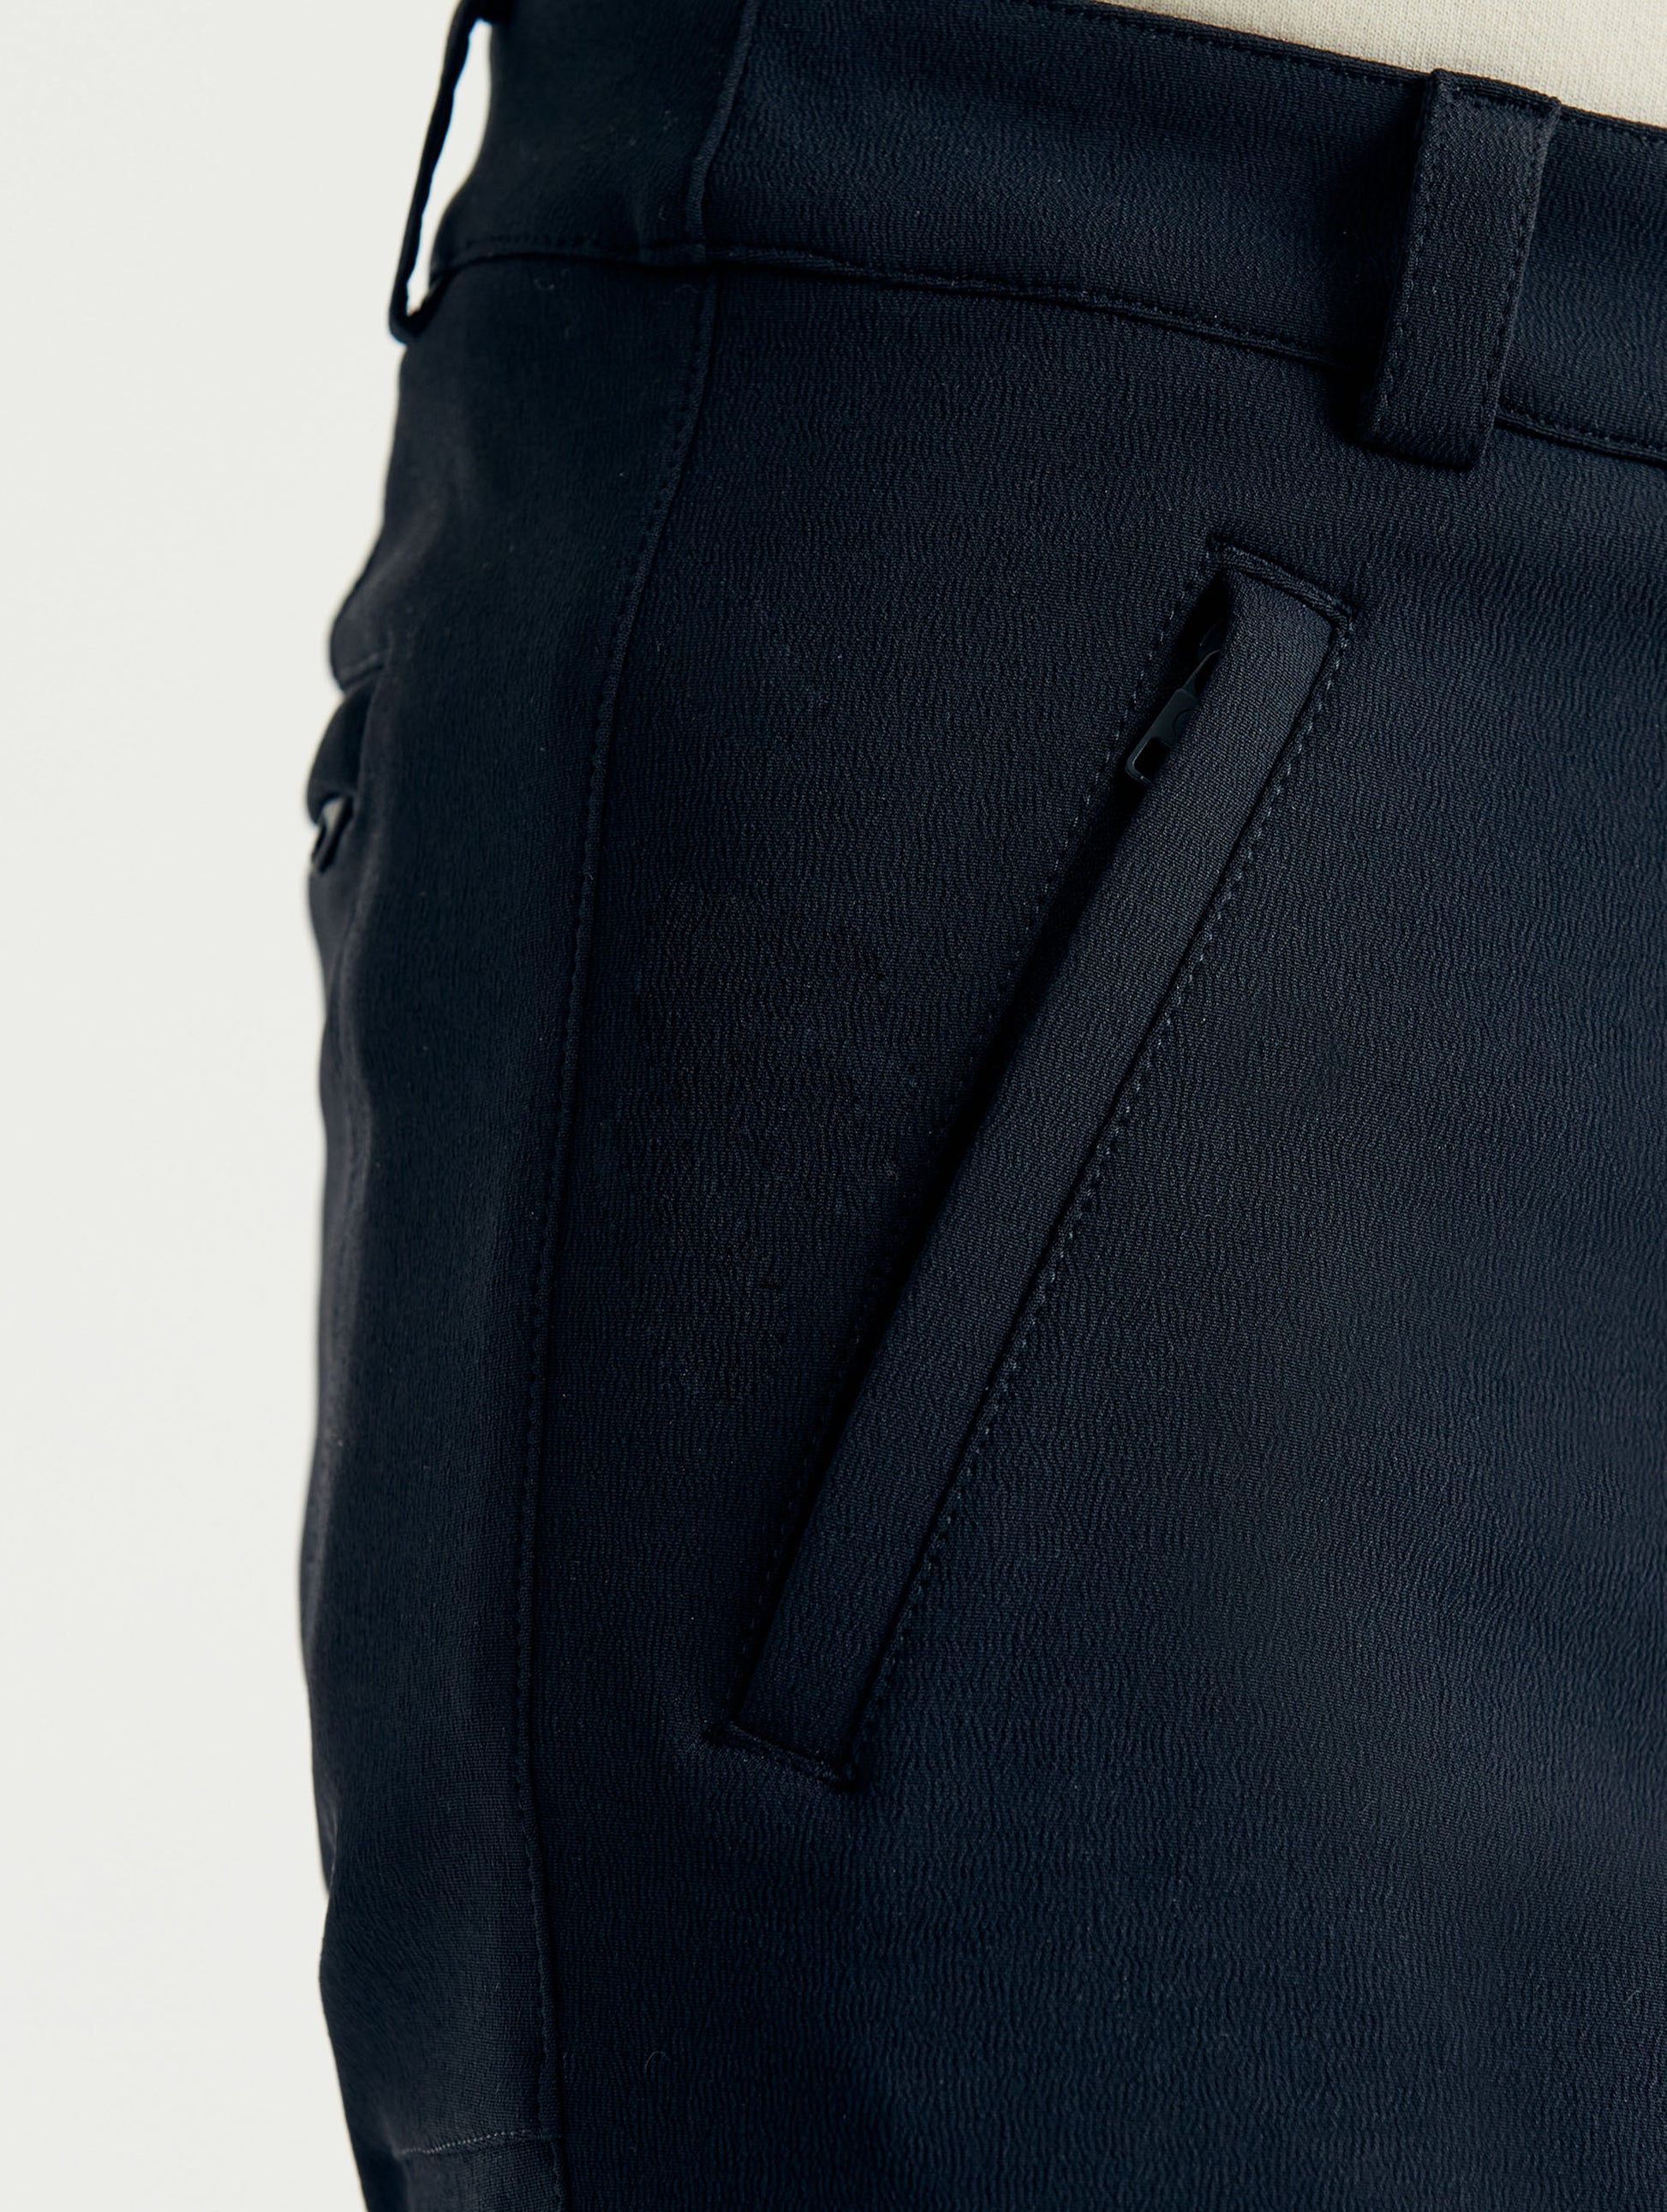 motorcycle pants for men from Aether Apparel